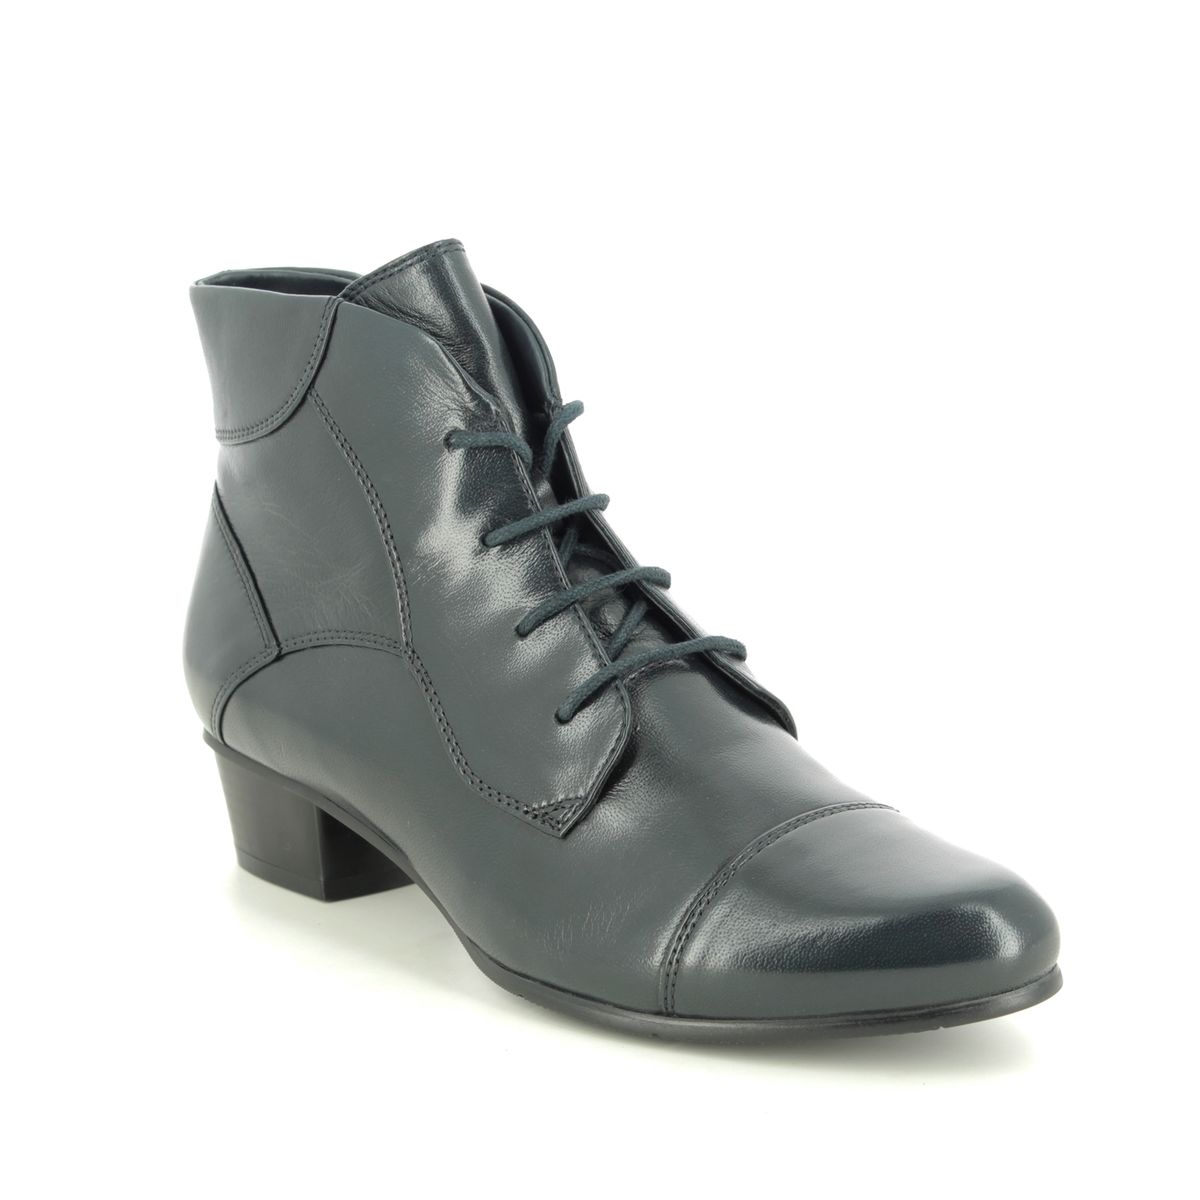 Regarde Le Ciel Stefany 123 Lace Navy Leather Womens Boots 0123-150 Ankle Boots In Soft Navy Leather Leather In Size 39